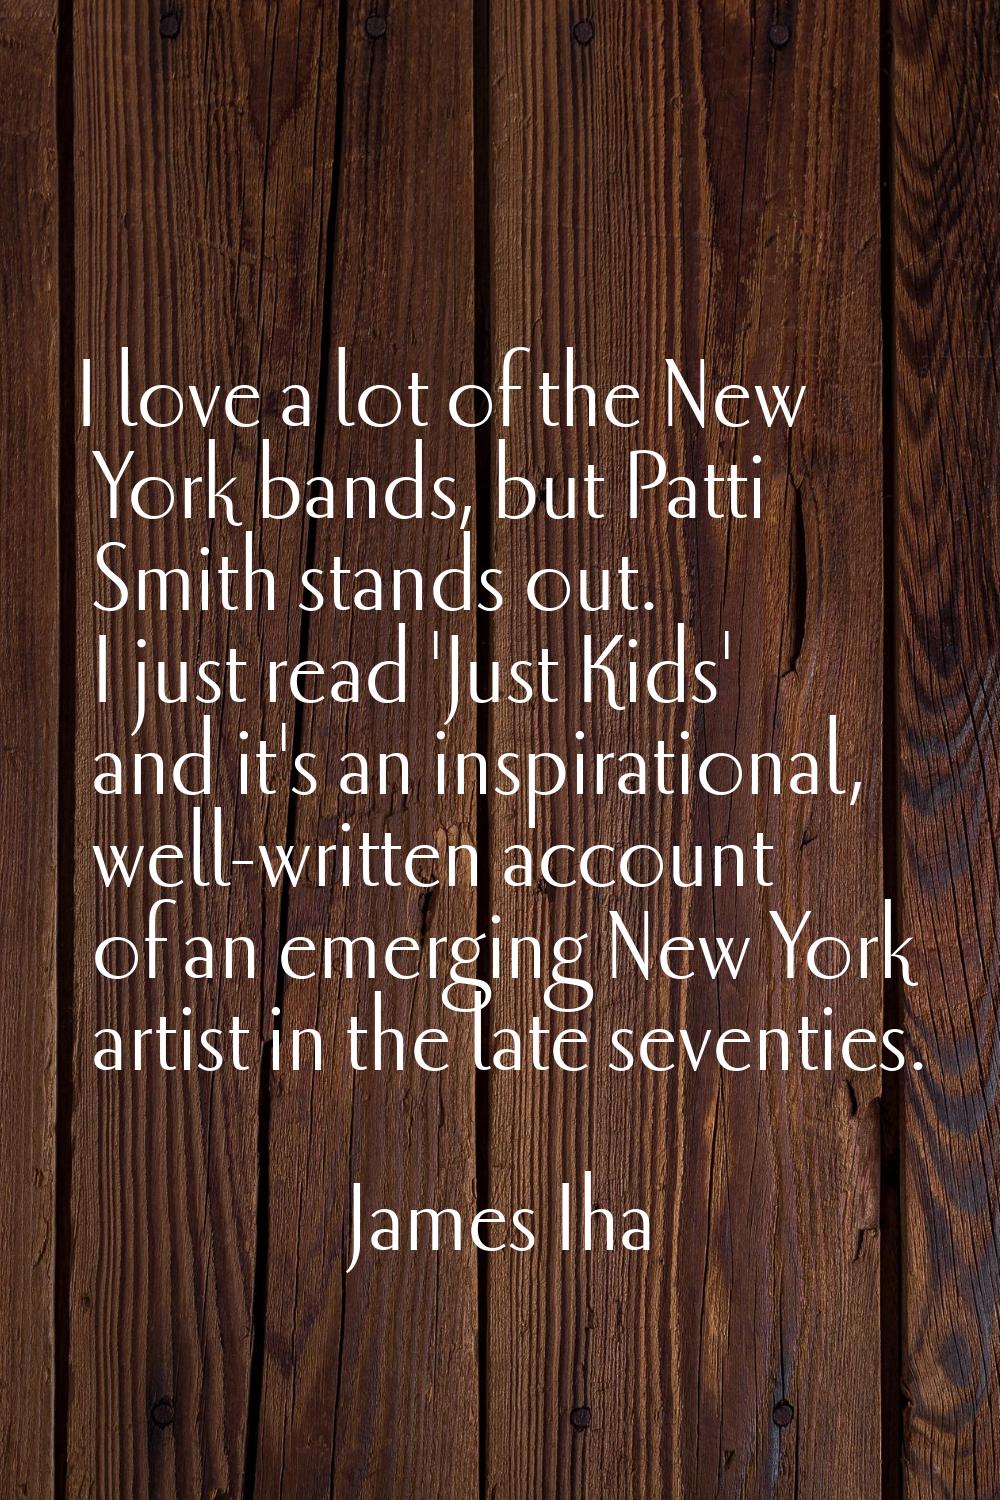 I love a lot of the New York bands, but Patti Smith stands out. I just read 'Just Kids' and it's an